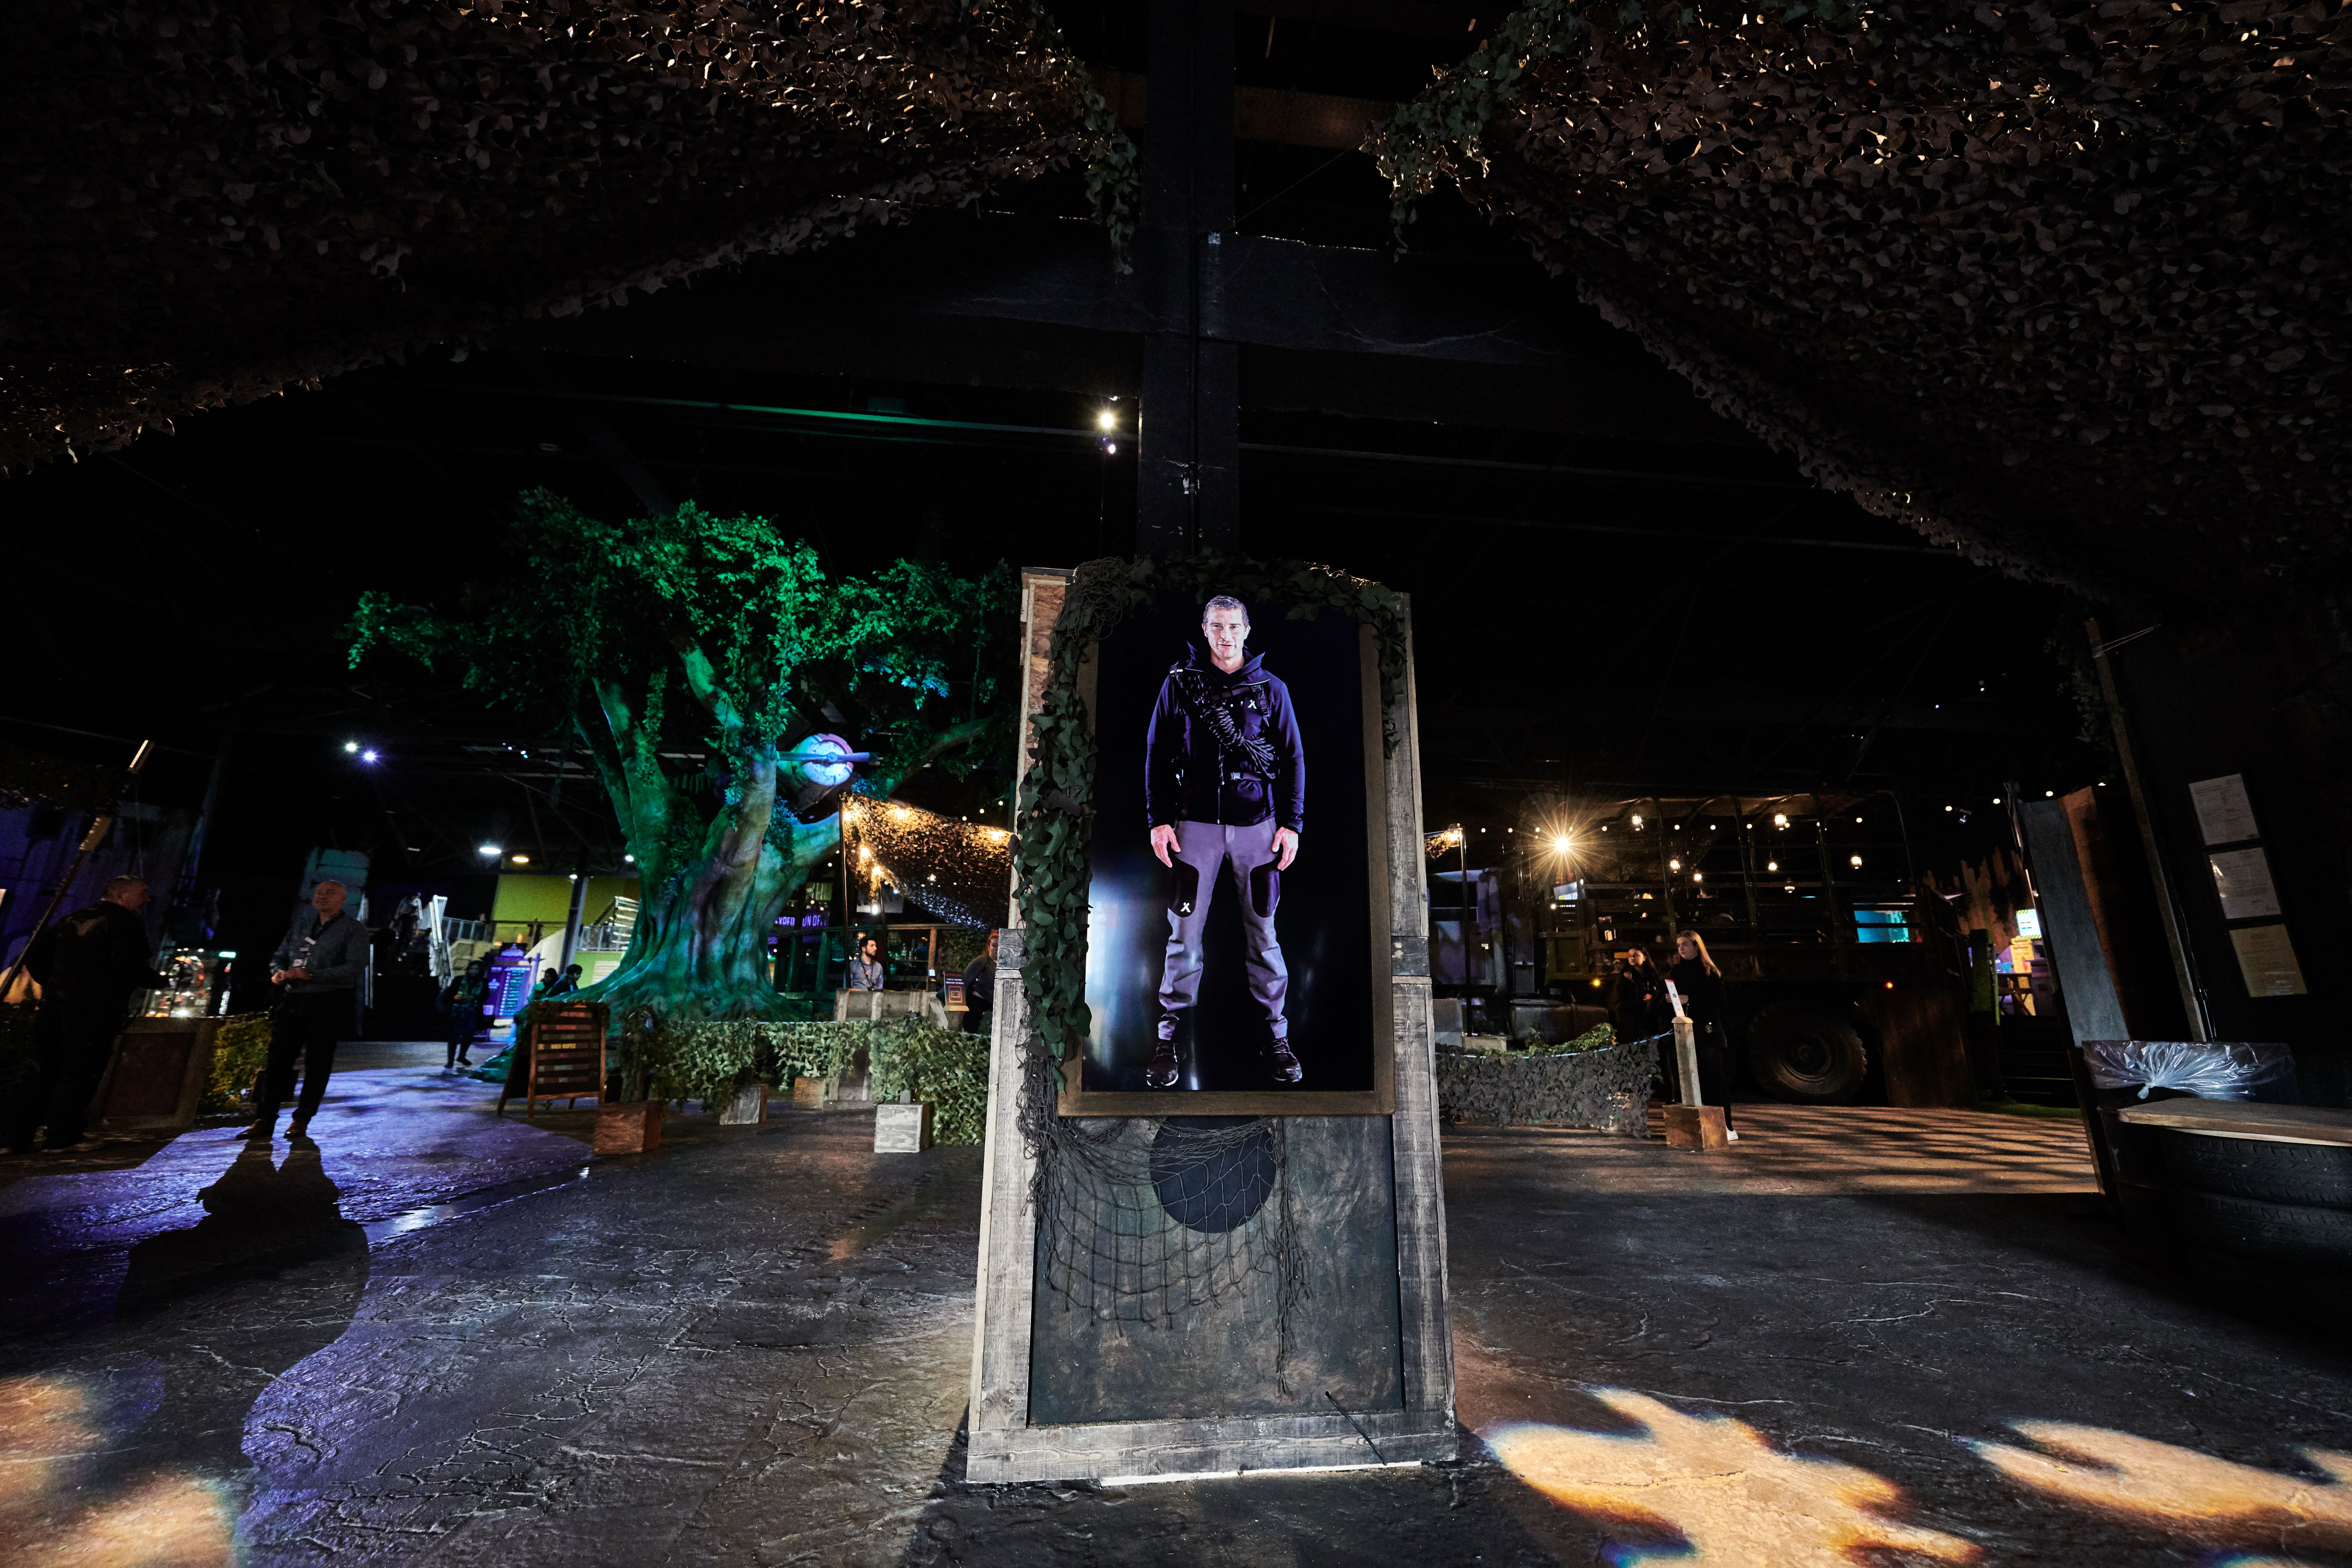 Bear Grylls welcomes guest on a screen in The Bear Grylls Adventure main entrance